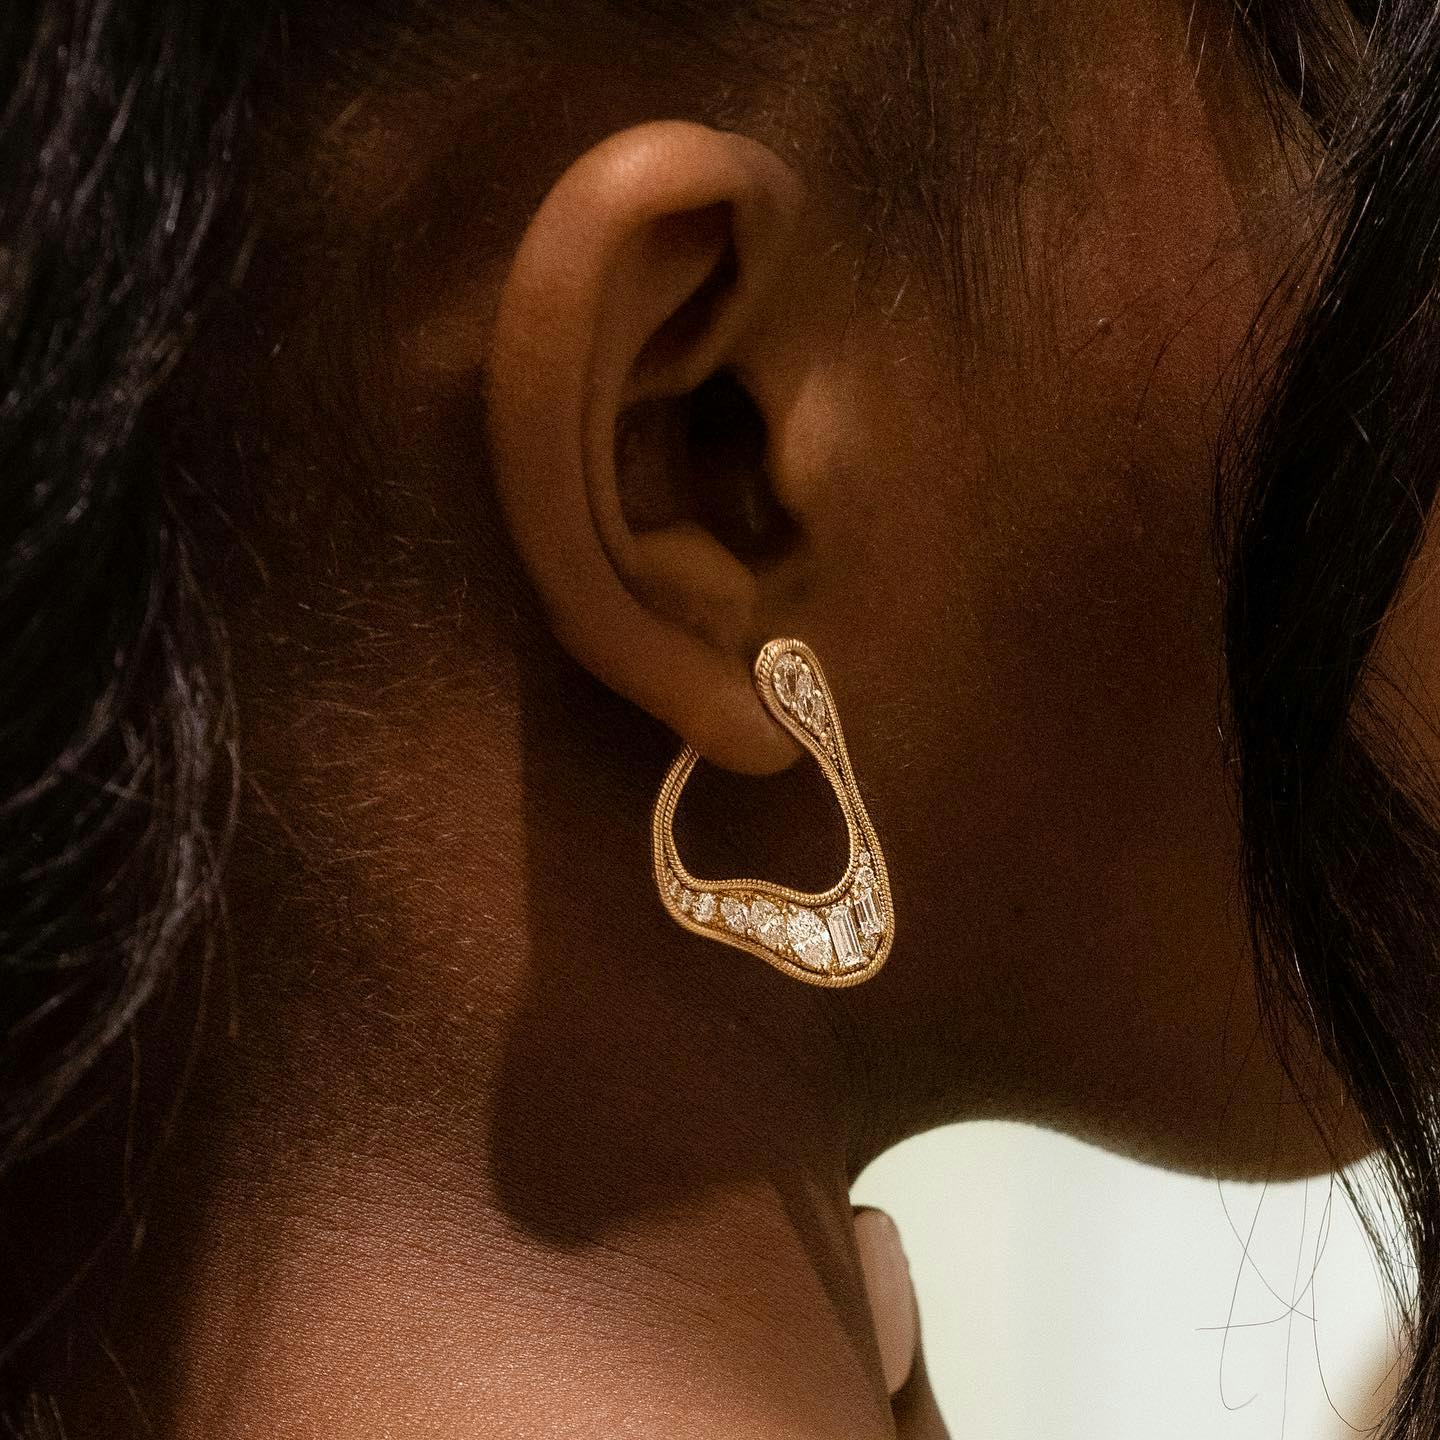 Inspired by water flowing over the curves of the body, the Stream diamond loop earrings have become emblematic of FERNANDO JORGE’S sensuous, design-driven jewelry.

Tap the link in bio to shop at #AUBADEJEWELRY.